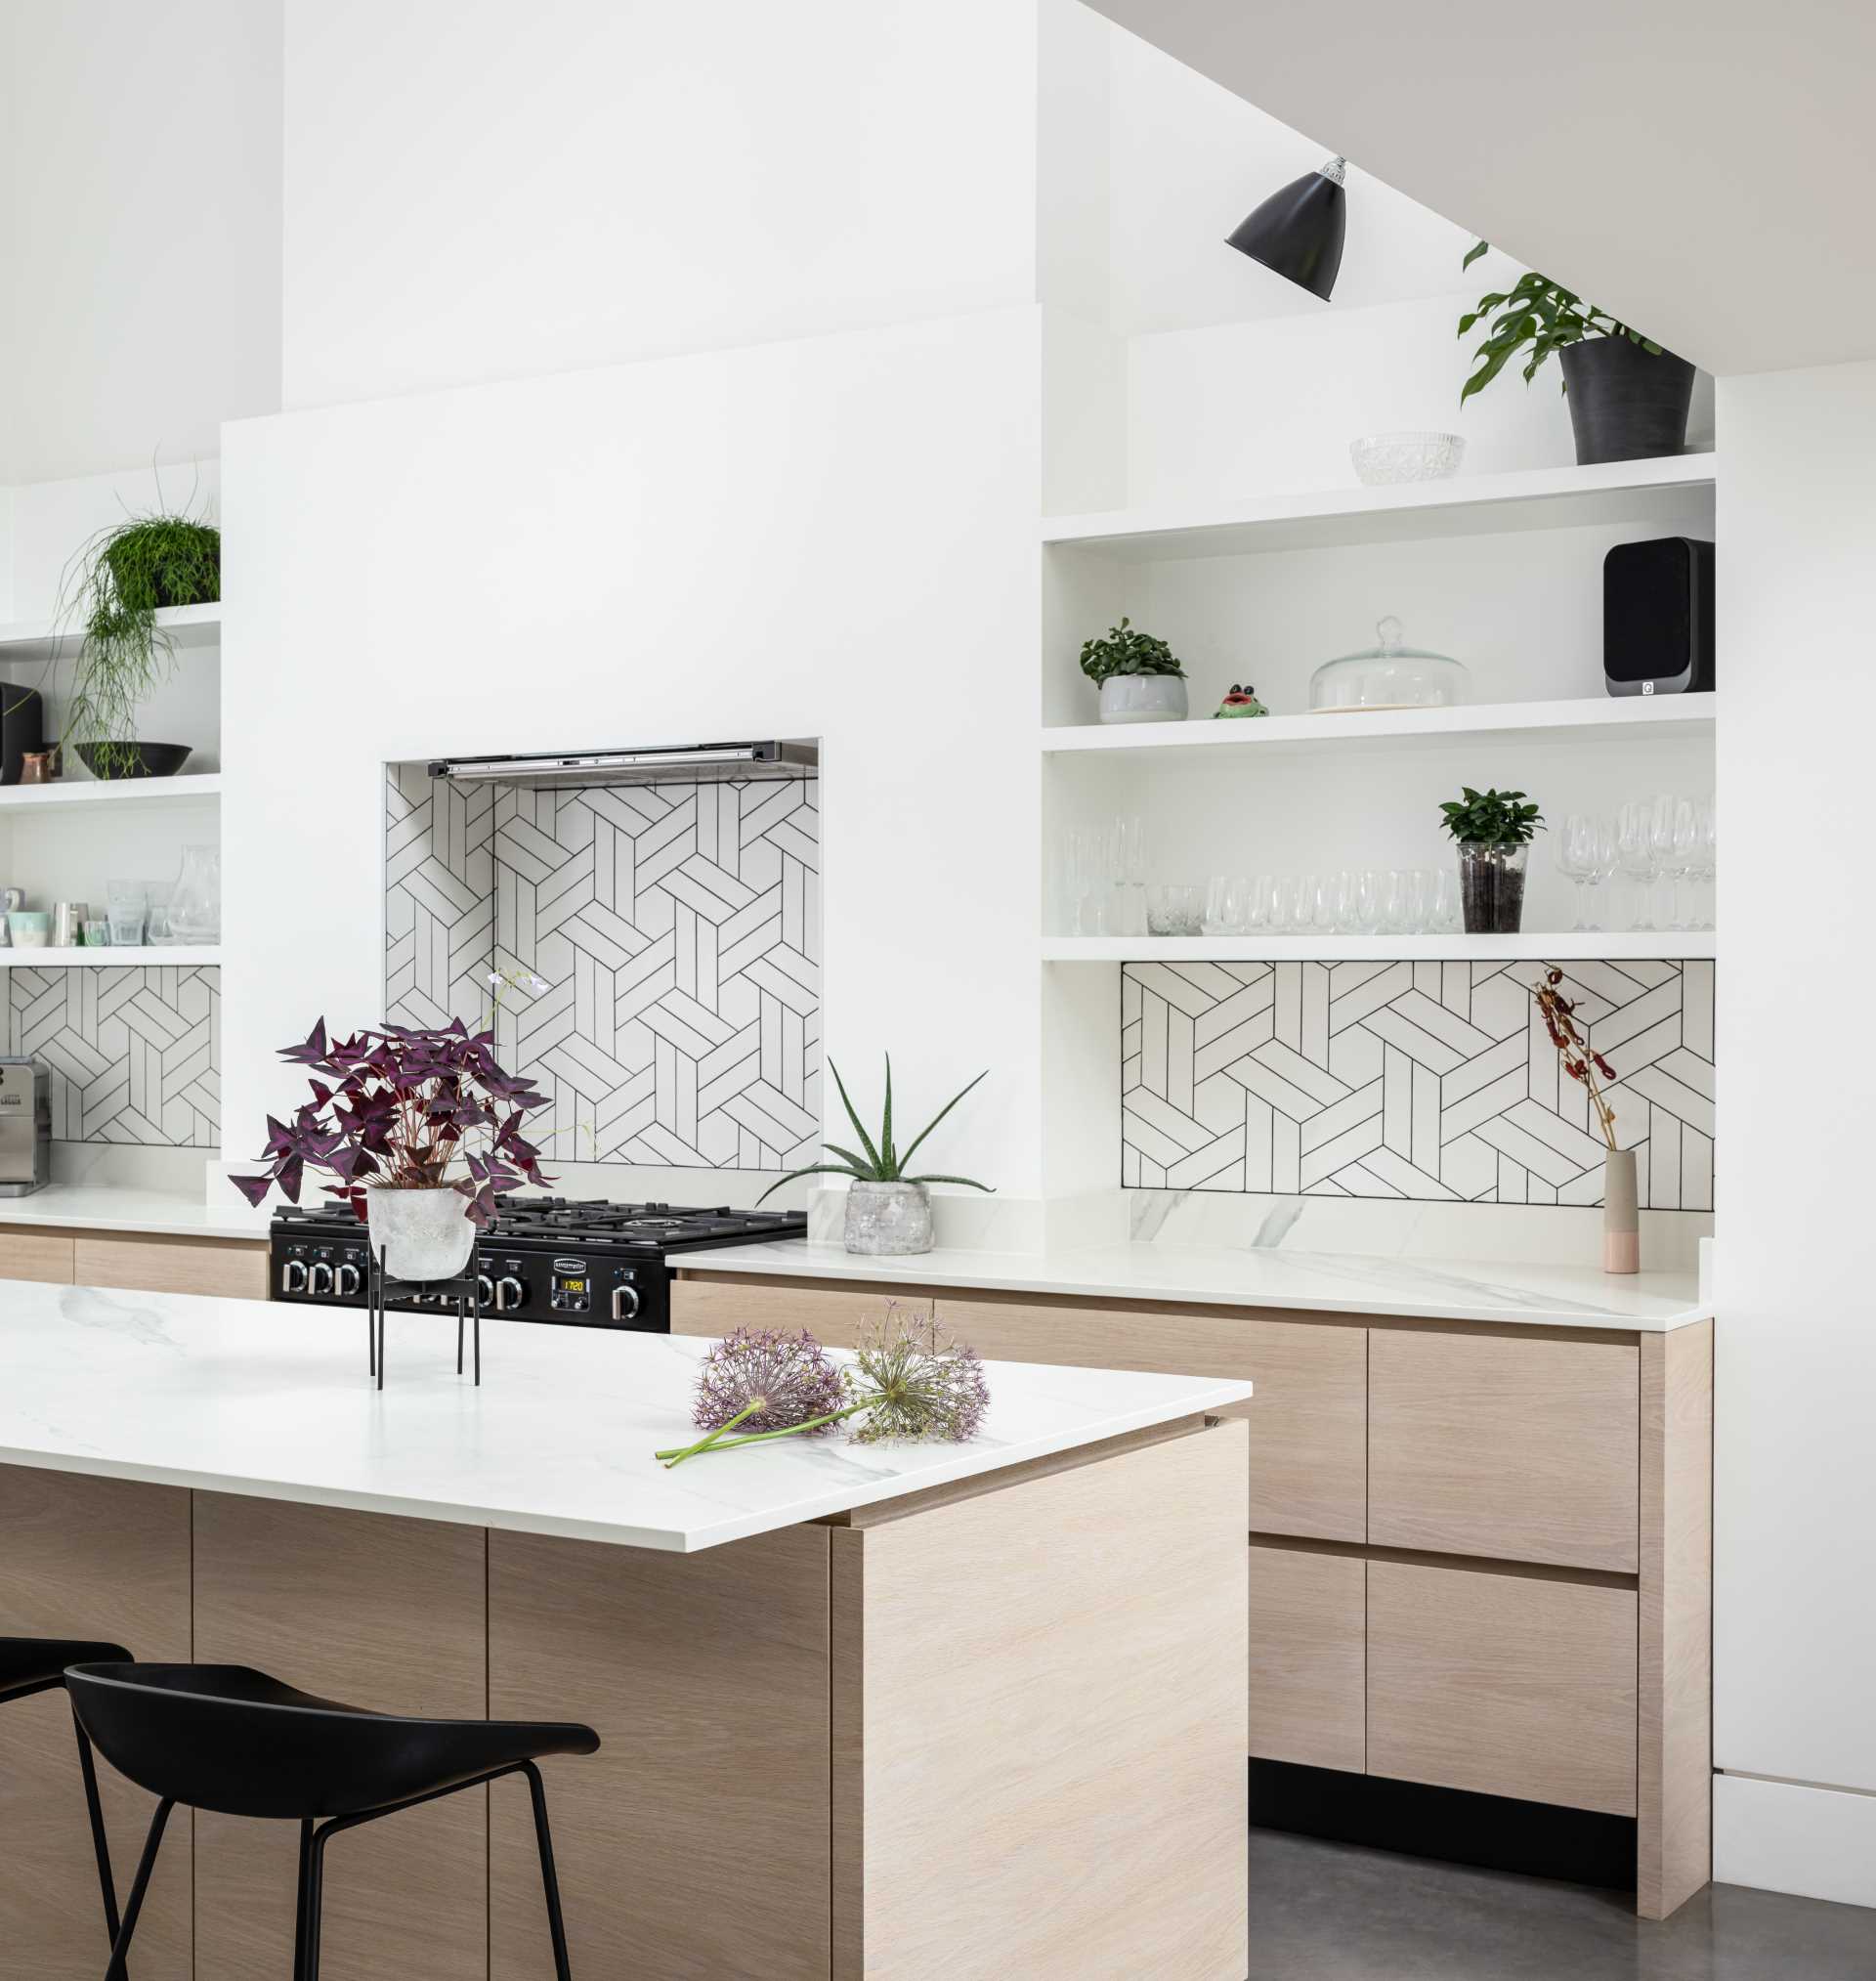 In the kitchen white walls and shelving are complemented by geometric tiles with dark grout and hardware-free wood cabinetry.